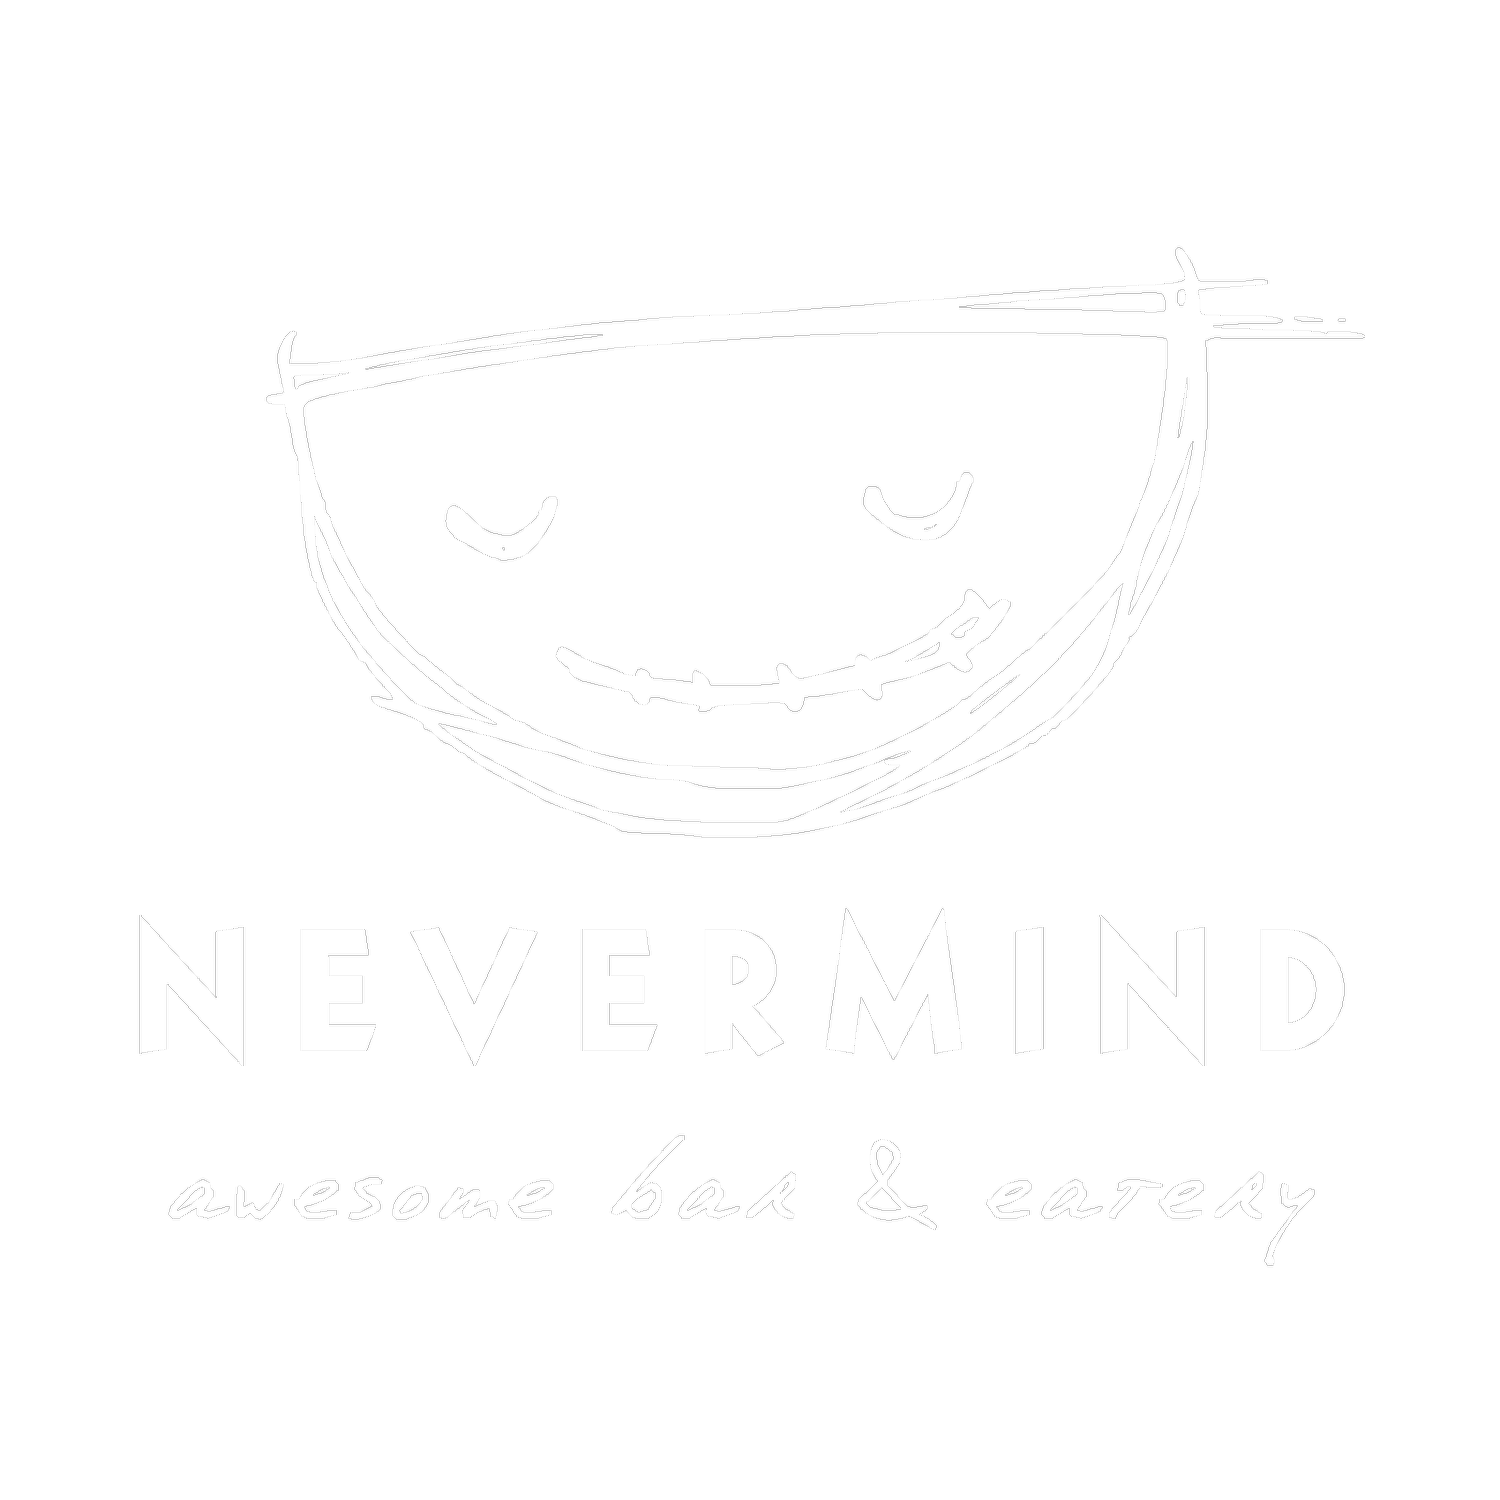 Nevermind awesome bar and eatery (Copy)